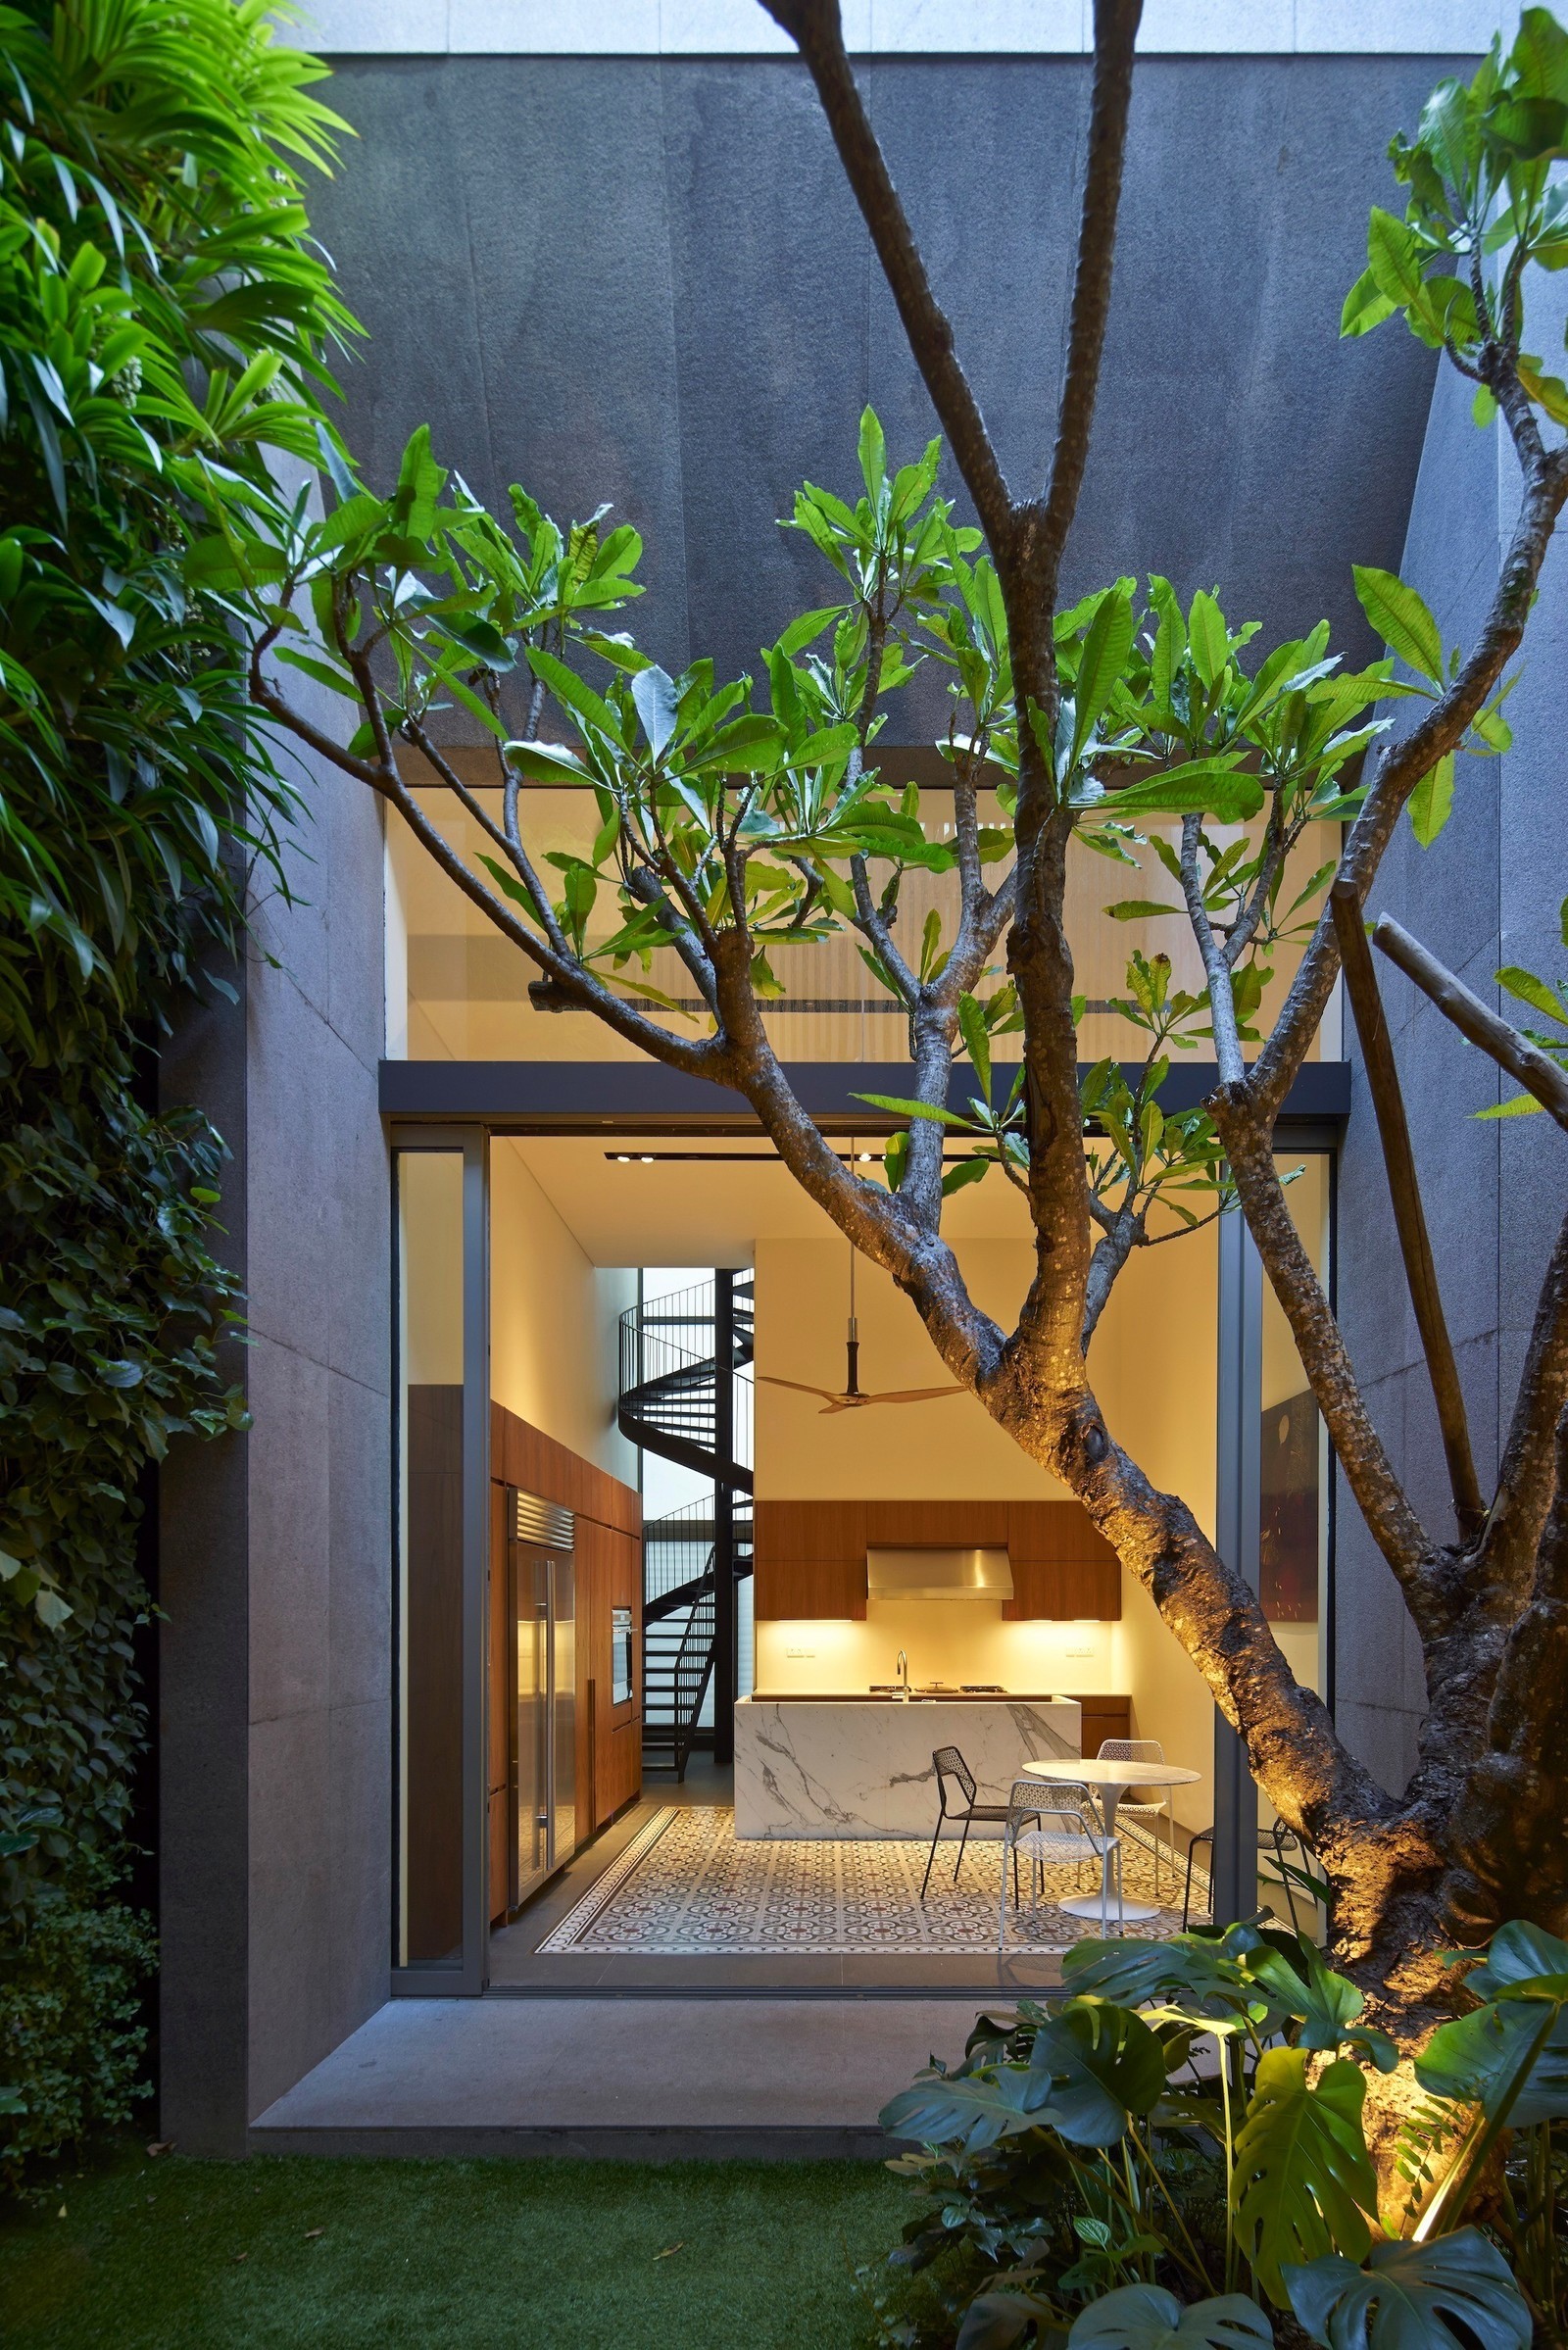 Home Renovation in Singapore